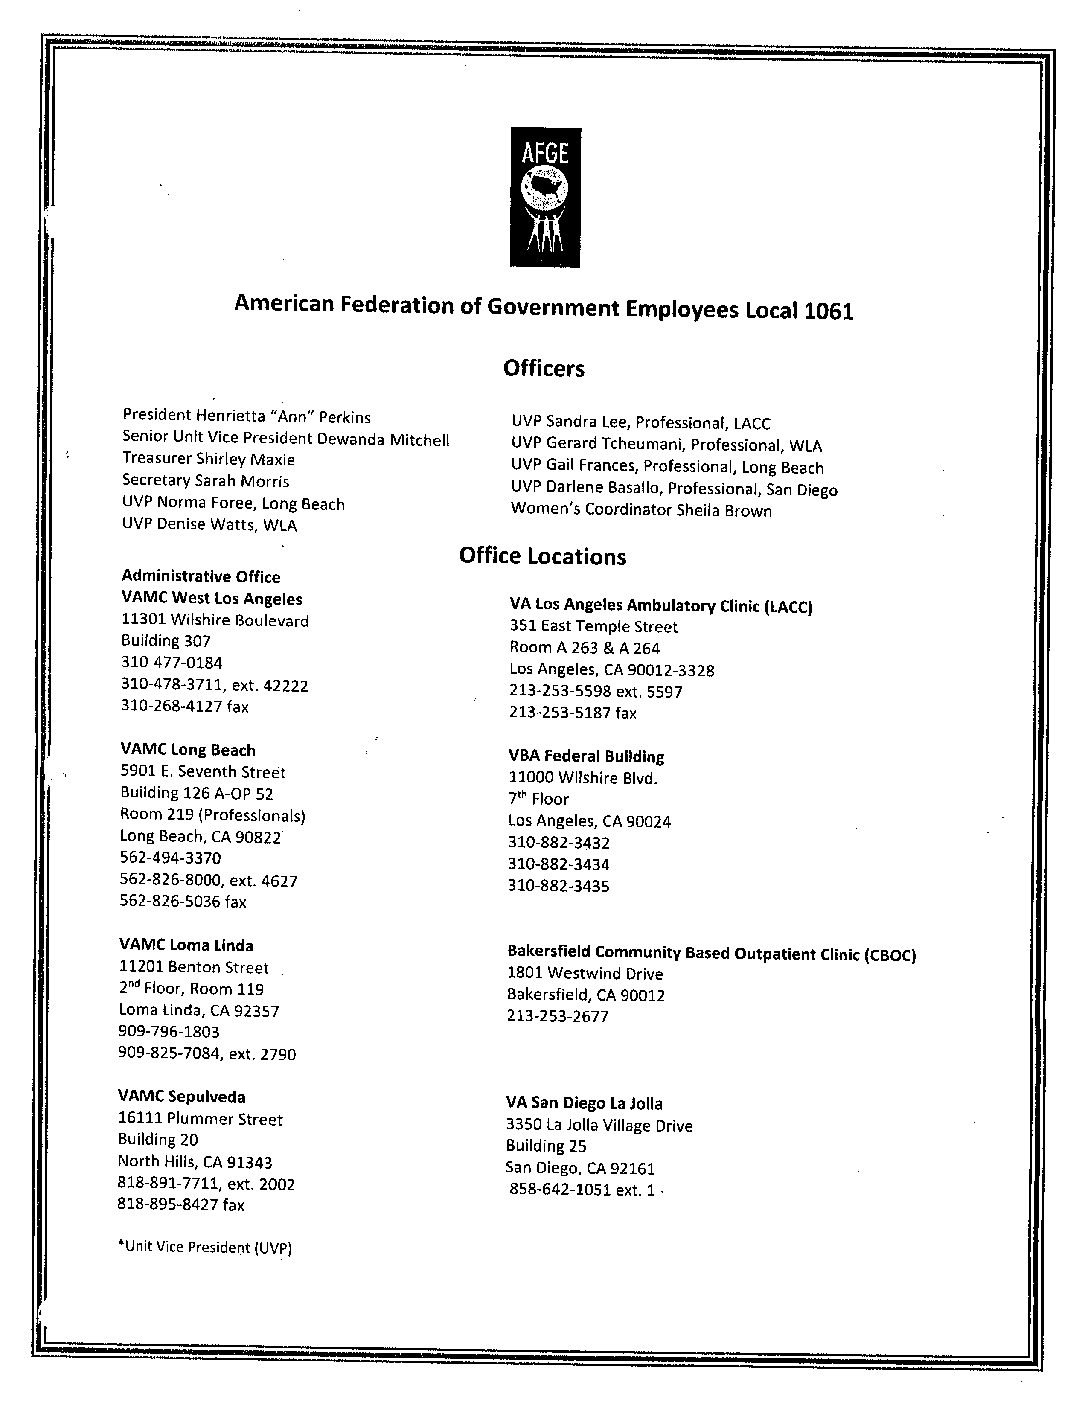 Complete Officers List & Phone # GLA